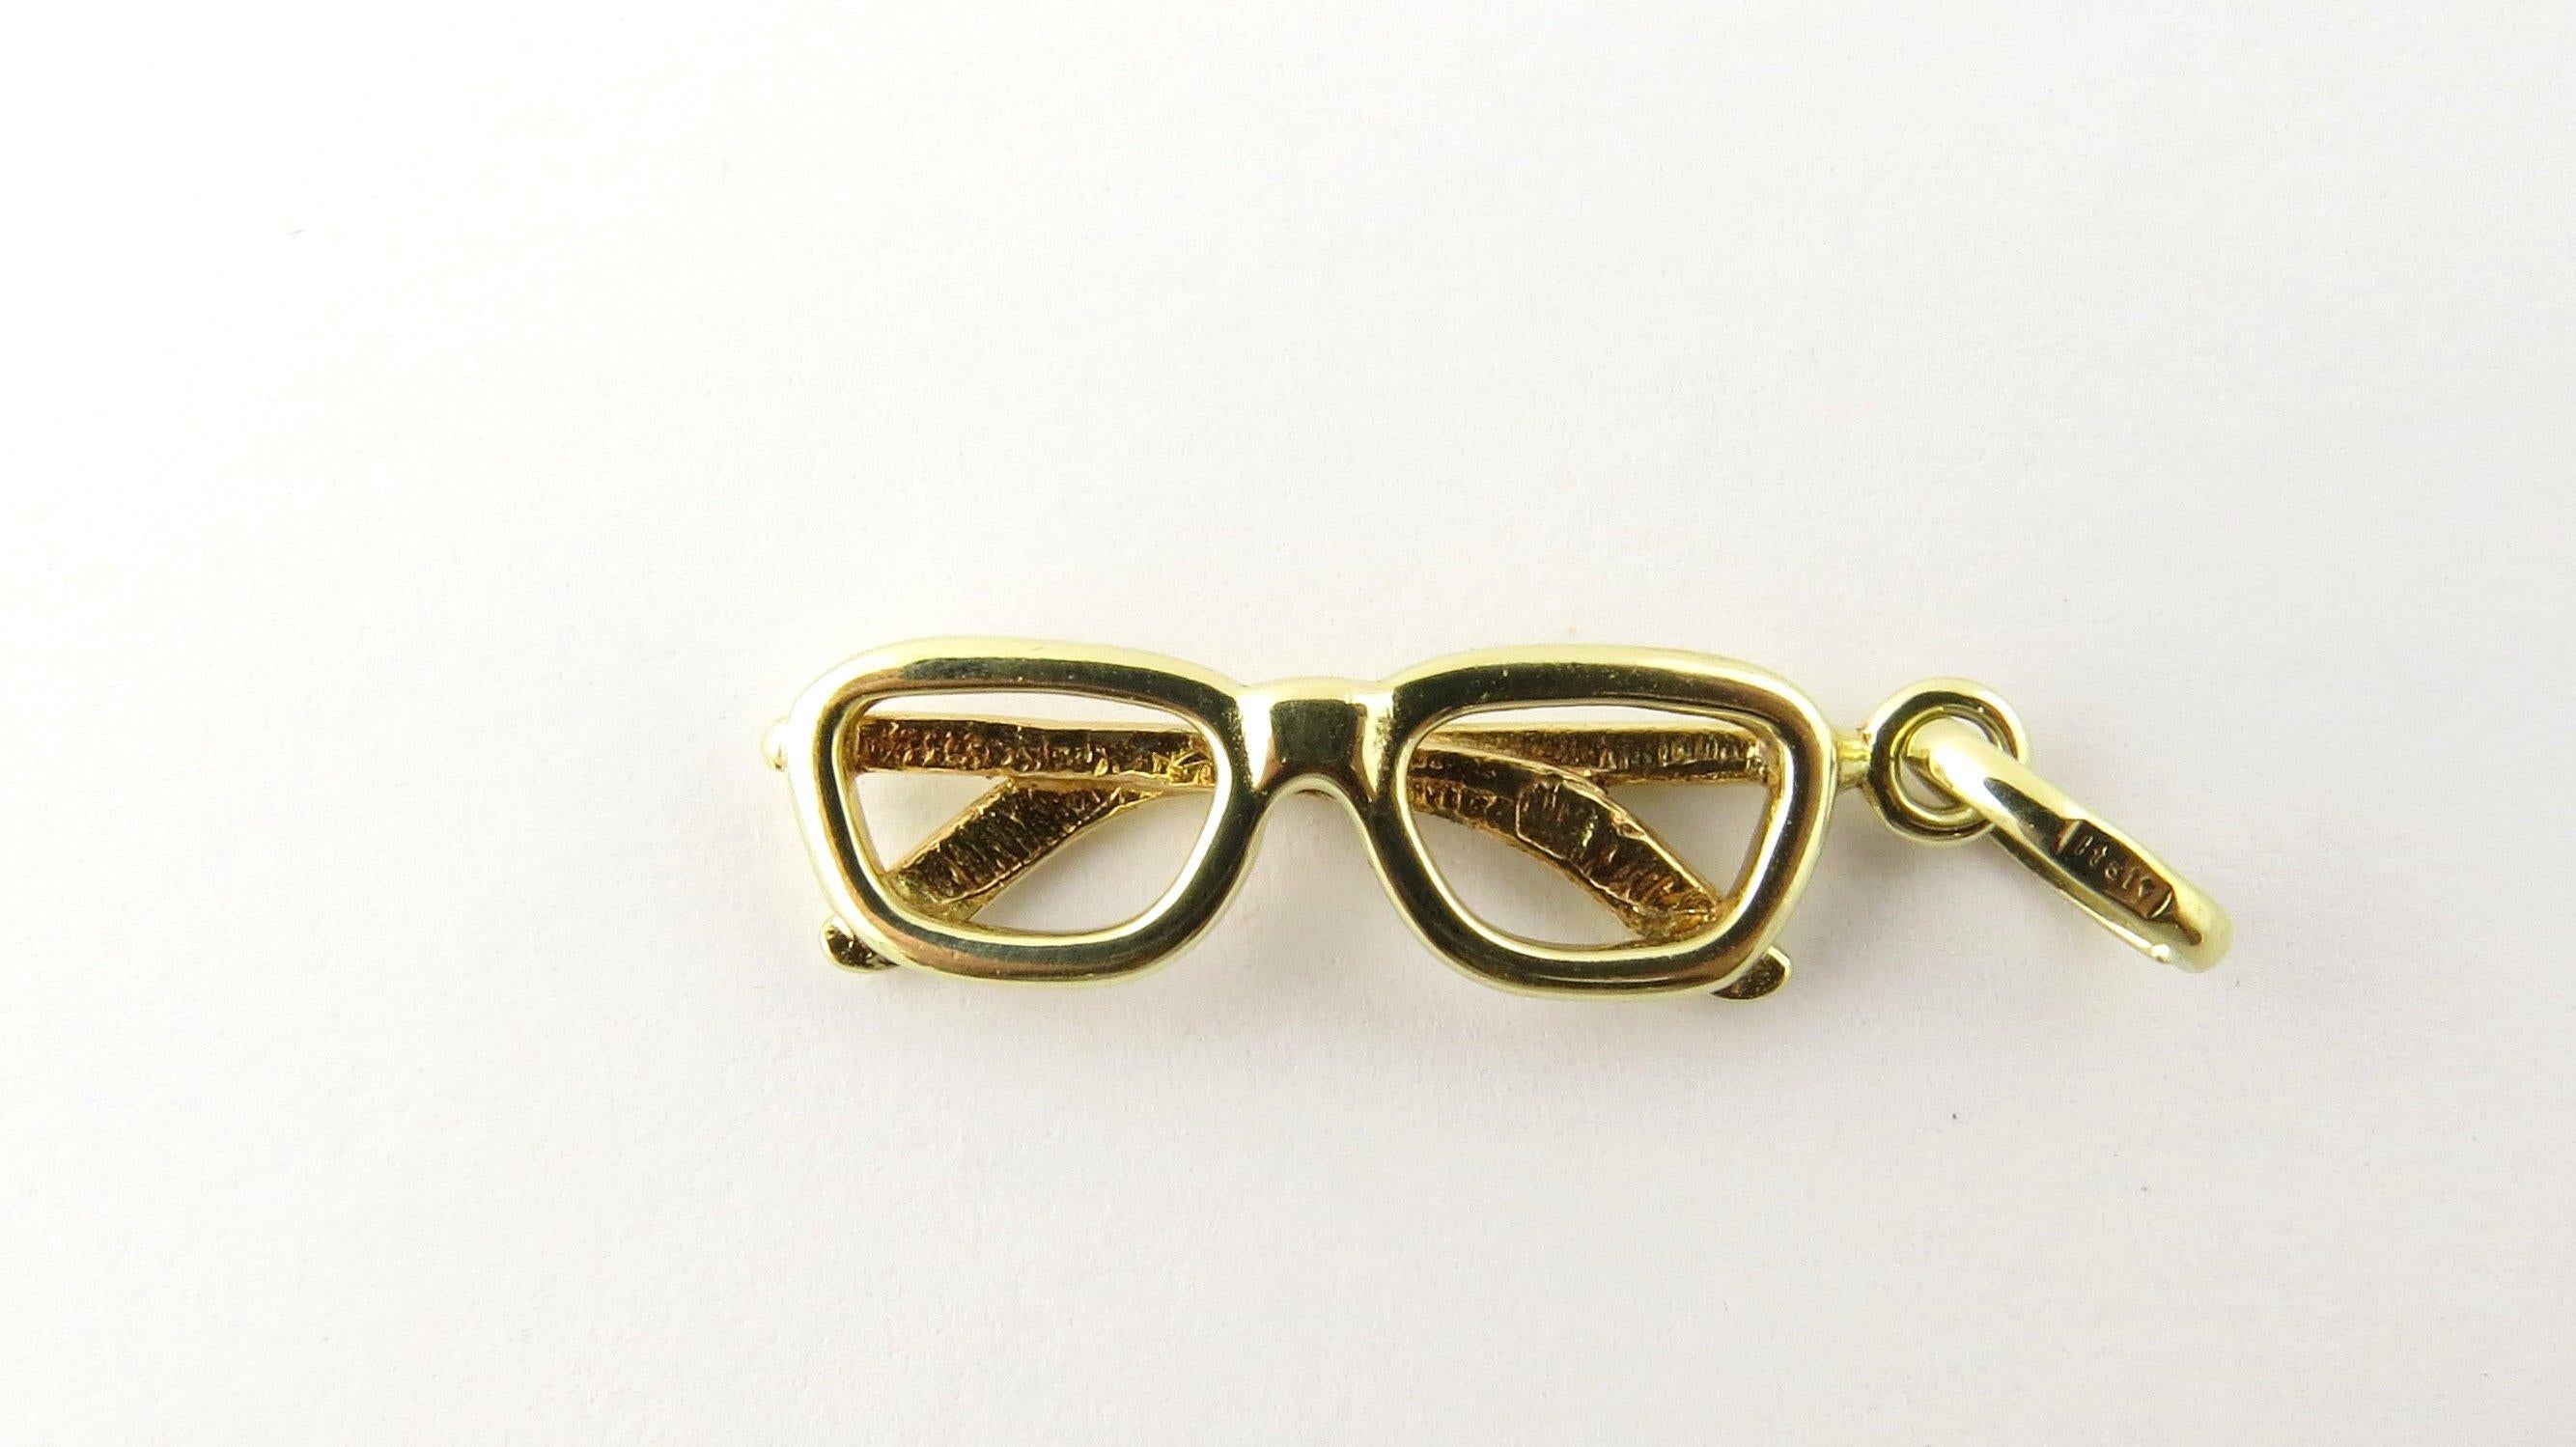 Vintage 14 Karat Yellow Gold Eyeglass Charm - Never lose your glasses again! This lovely 3D charm features a miniature pair of eyeglasses meticulously detailed in 14K yellow gold.
Size: 27 mm x 9 mm (actual charm) Weight: 1.3 dwt. / 2.1gr. Stamped: